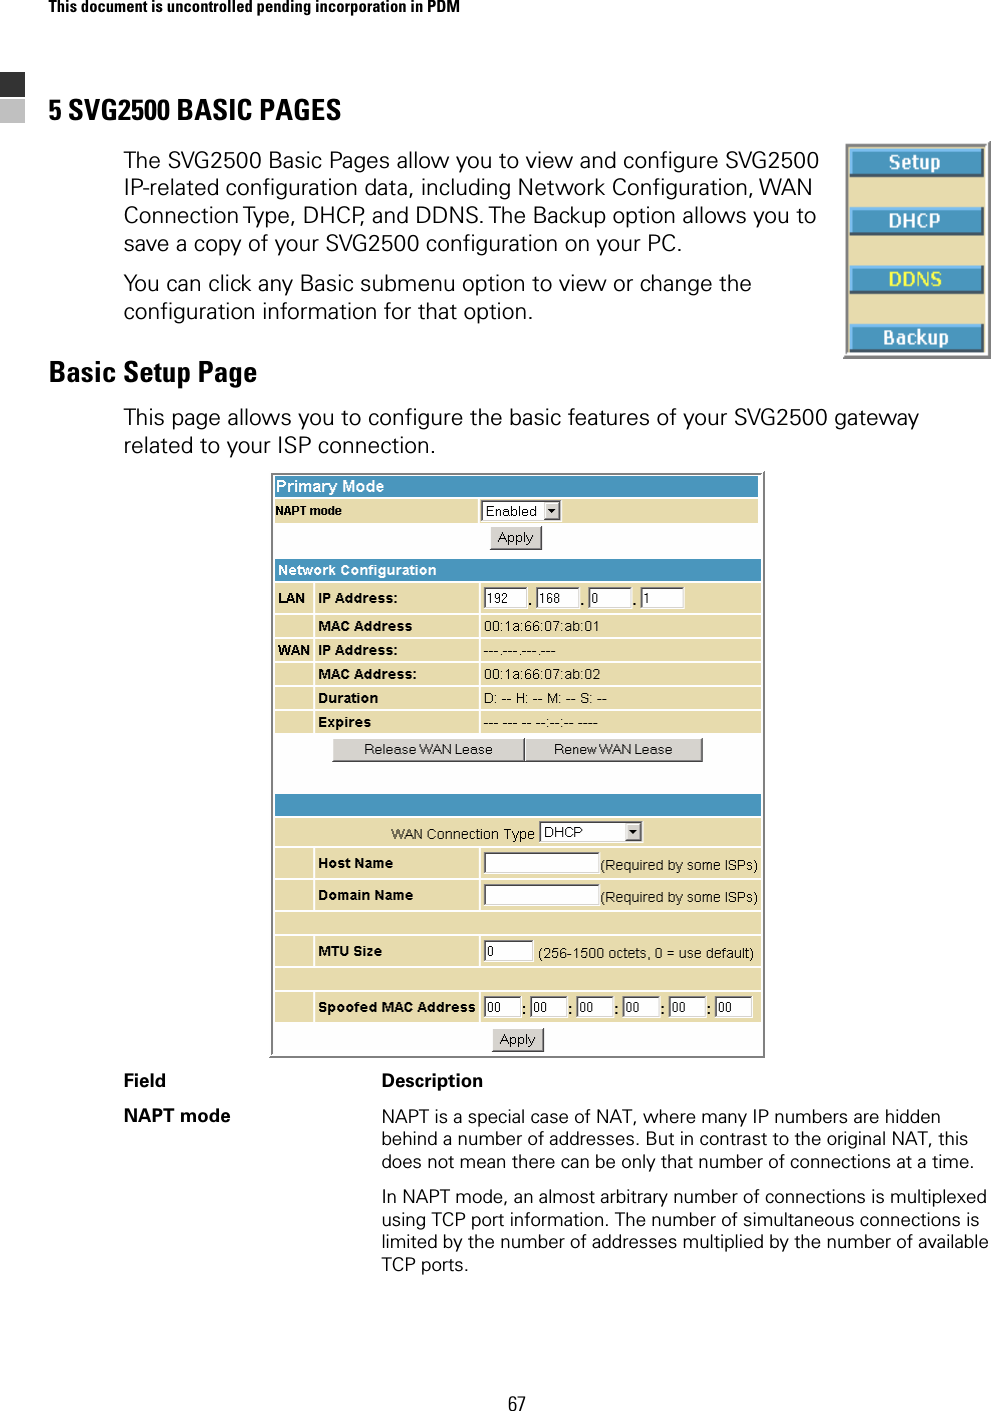 This document is uncontrolled pending incorporation in PDM  67 5 SVG2500 BASIC PAGES The SVG2500 Basic Pages allow you to view and configure SVG2500 IP-related configuration data, including Network Configuration, WAN Connection Type, DHCP, and DDNS. The Backup option allows you to save a copy of your SVG2500 configuration on your PC.  You can click any Basic submenu option to view or change the configuration information for that option. Basic Setup Page This page allows you to configure the basic features of your SVG2500 gateway related to your ISP connection.  Field   Description NAPT mode  NAPT is a special case of NAT, where many IP numbers are hidden behind a number of addresses. But in contrast to the original NAT, this does not mean there can be only that number of connections at a time.  In NAPT mode, an almost arbitrary number of connections is multiplexed using TCP port information. The number of simultaneous connections is limited by the number of addresses multiplied by the number of available TCP ports. 